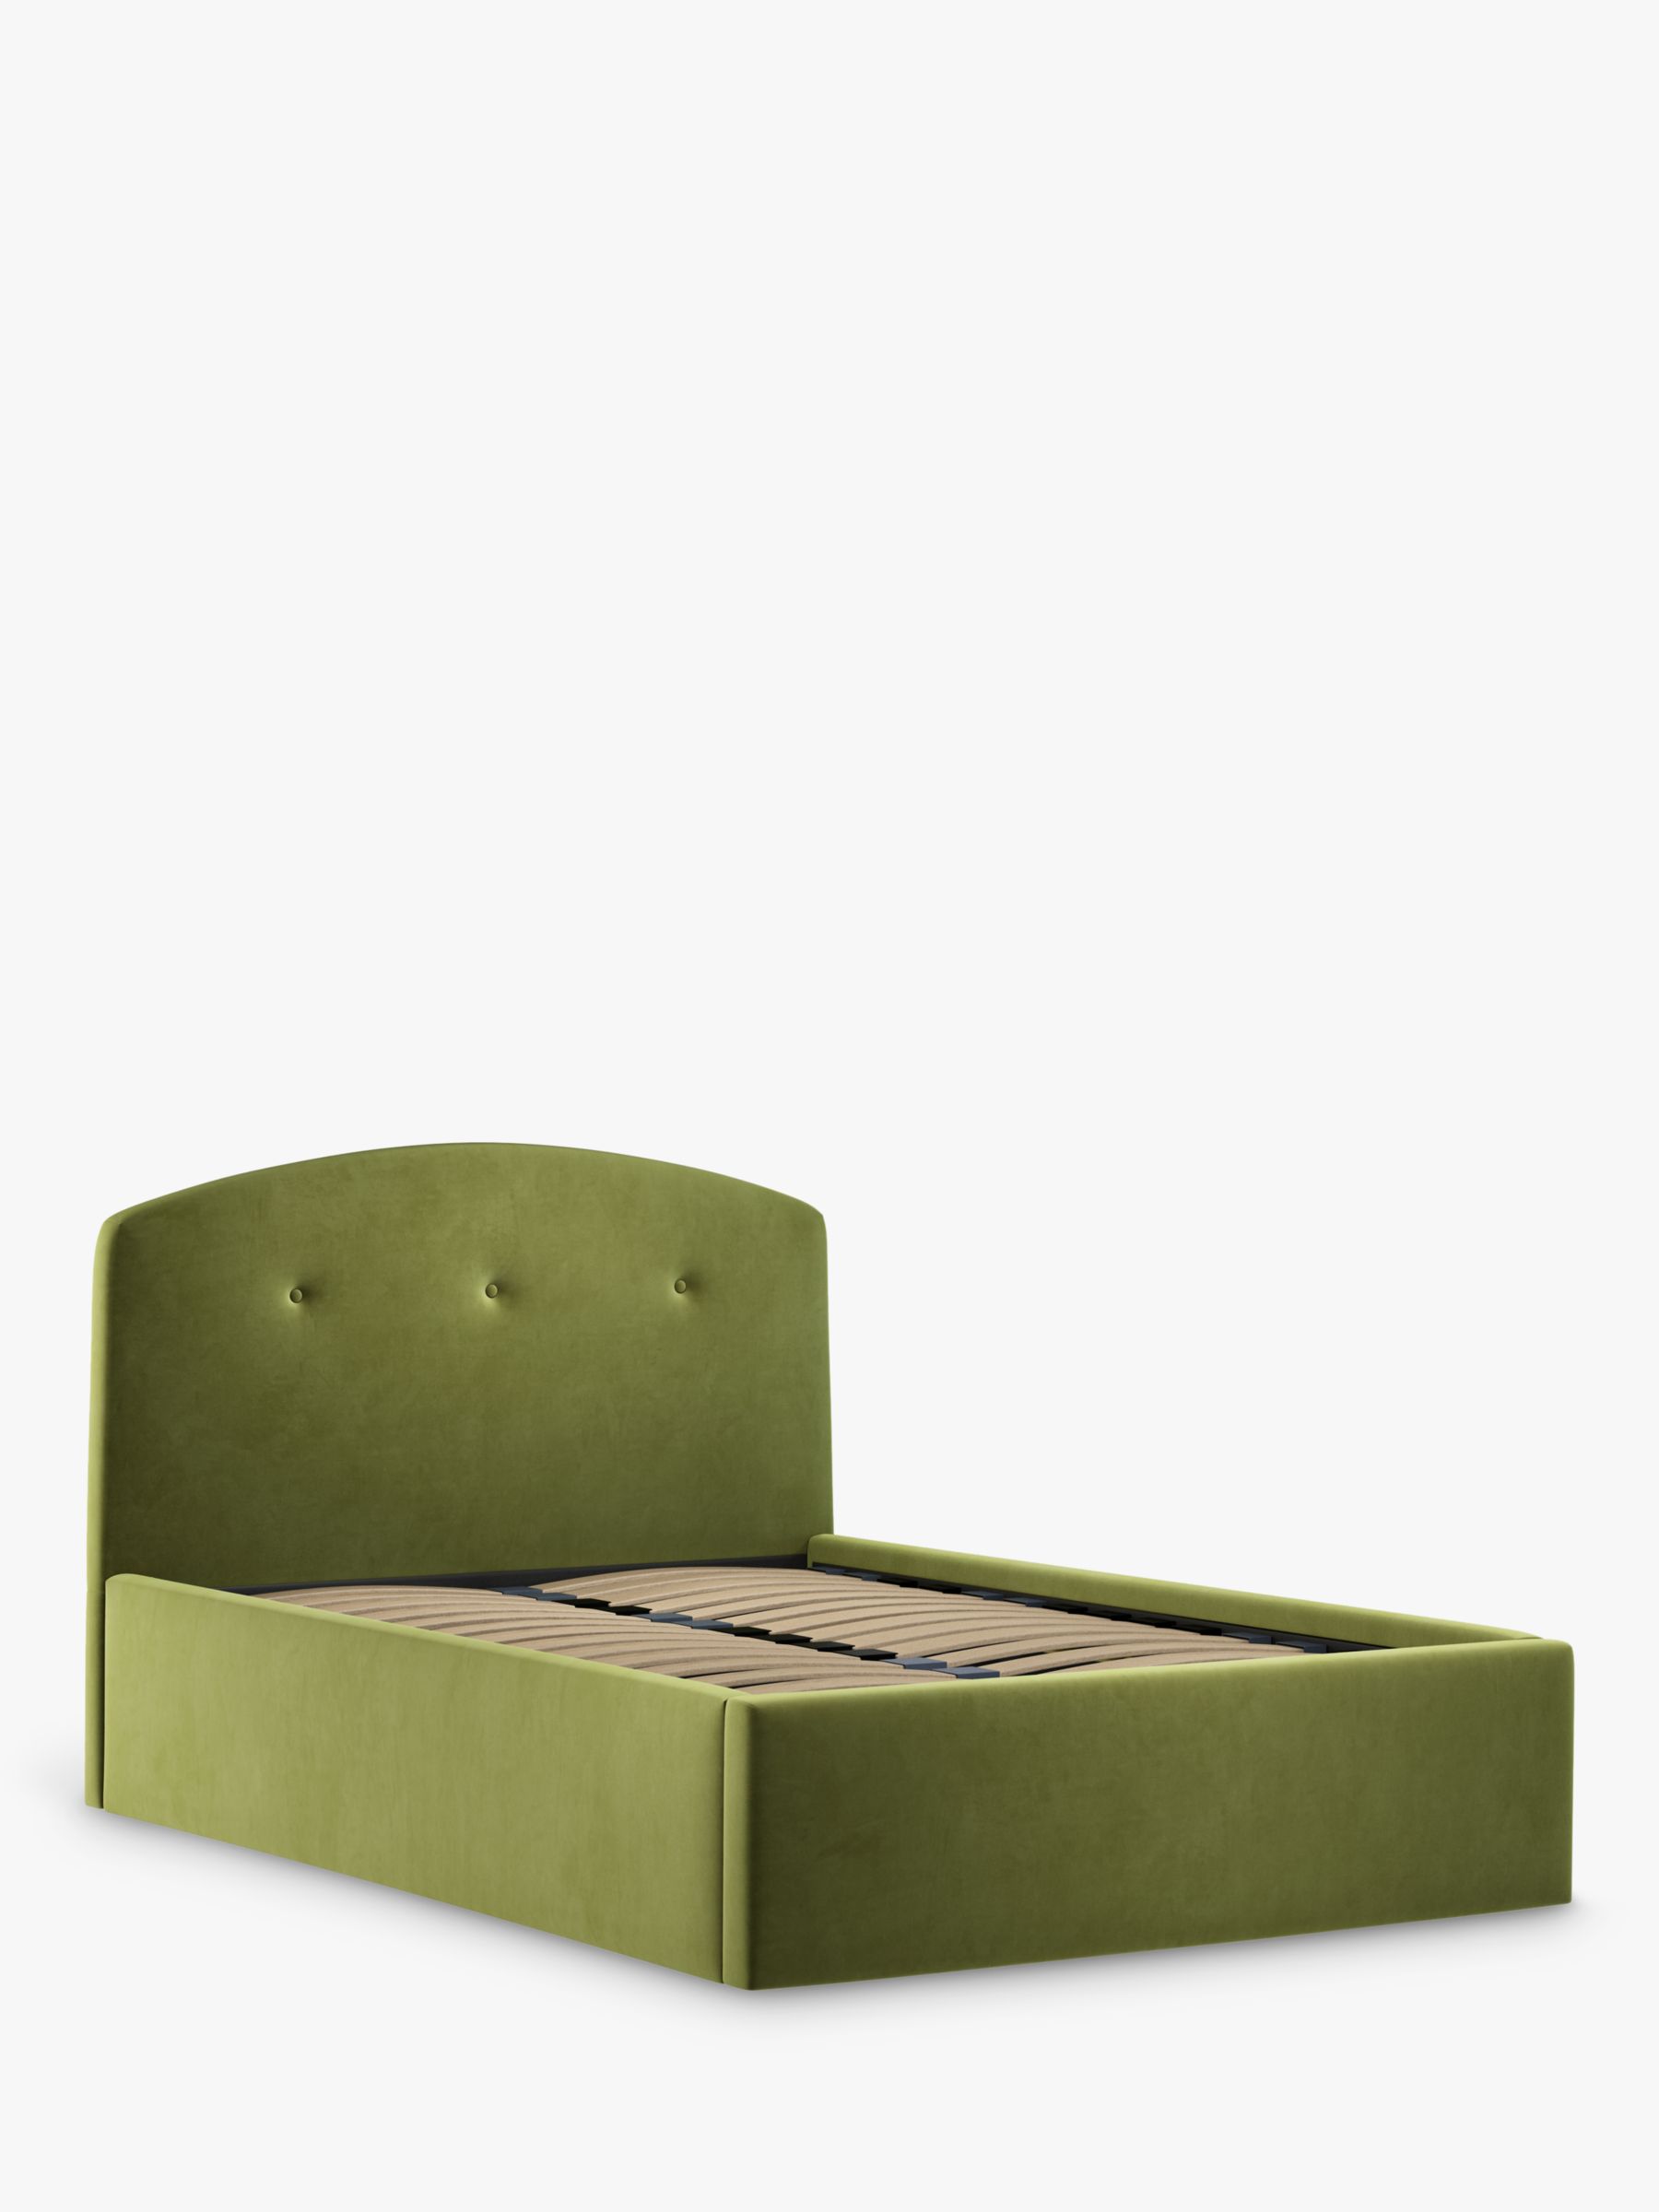 Photo of John lewis grace ottoman storage upholstered bed frame double